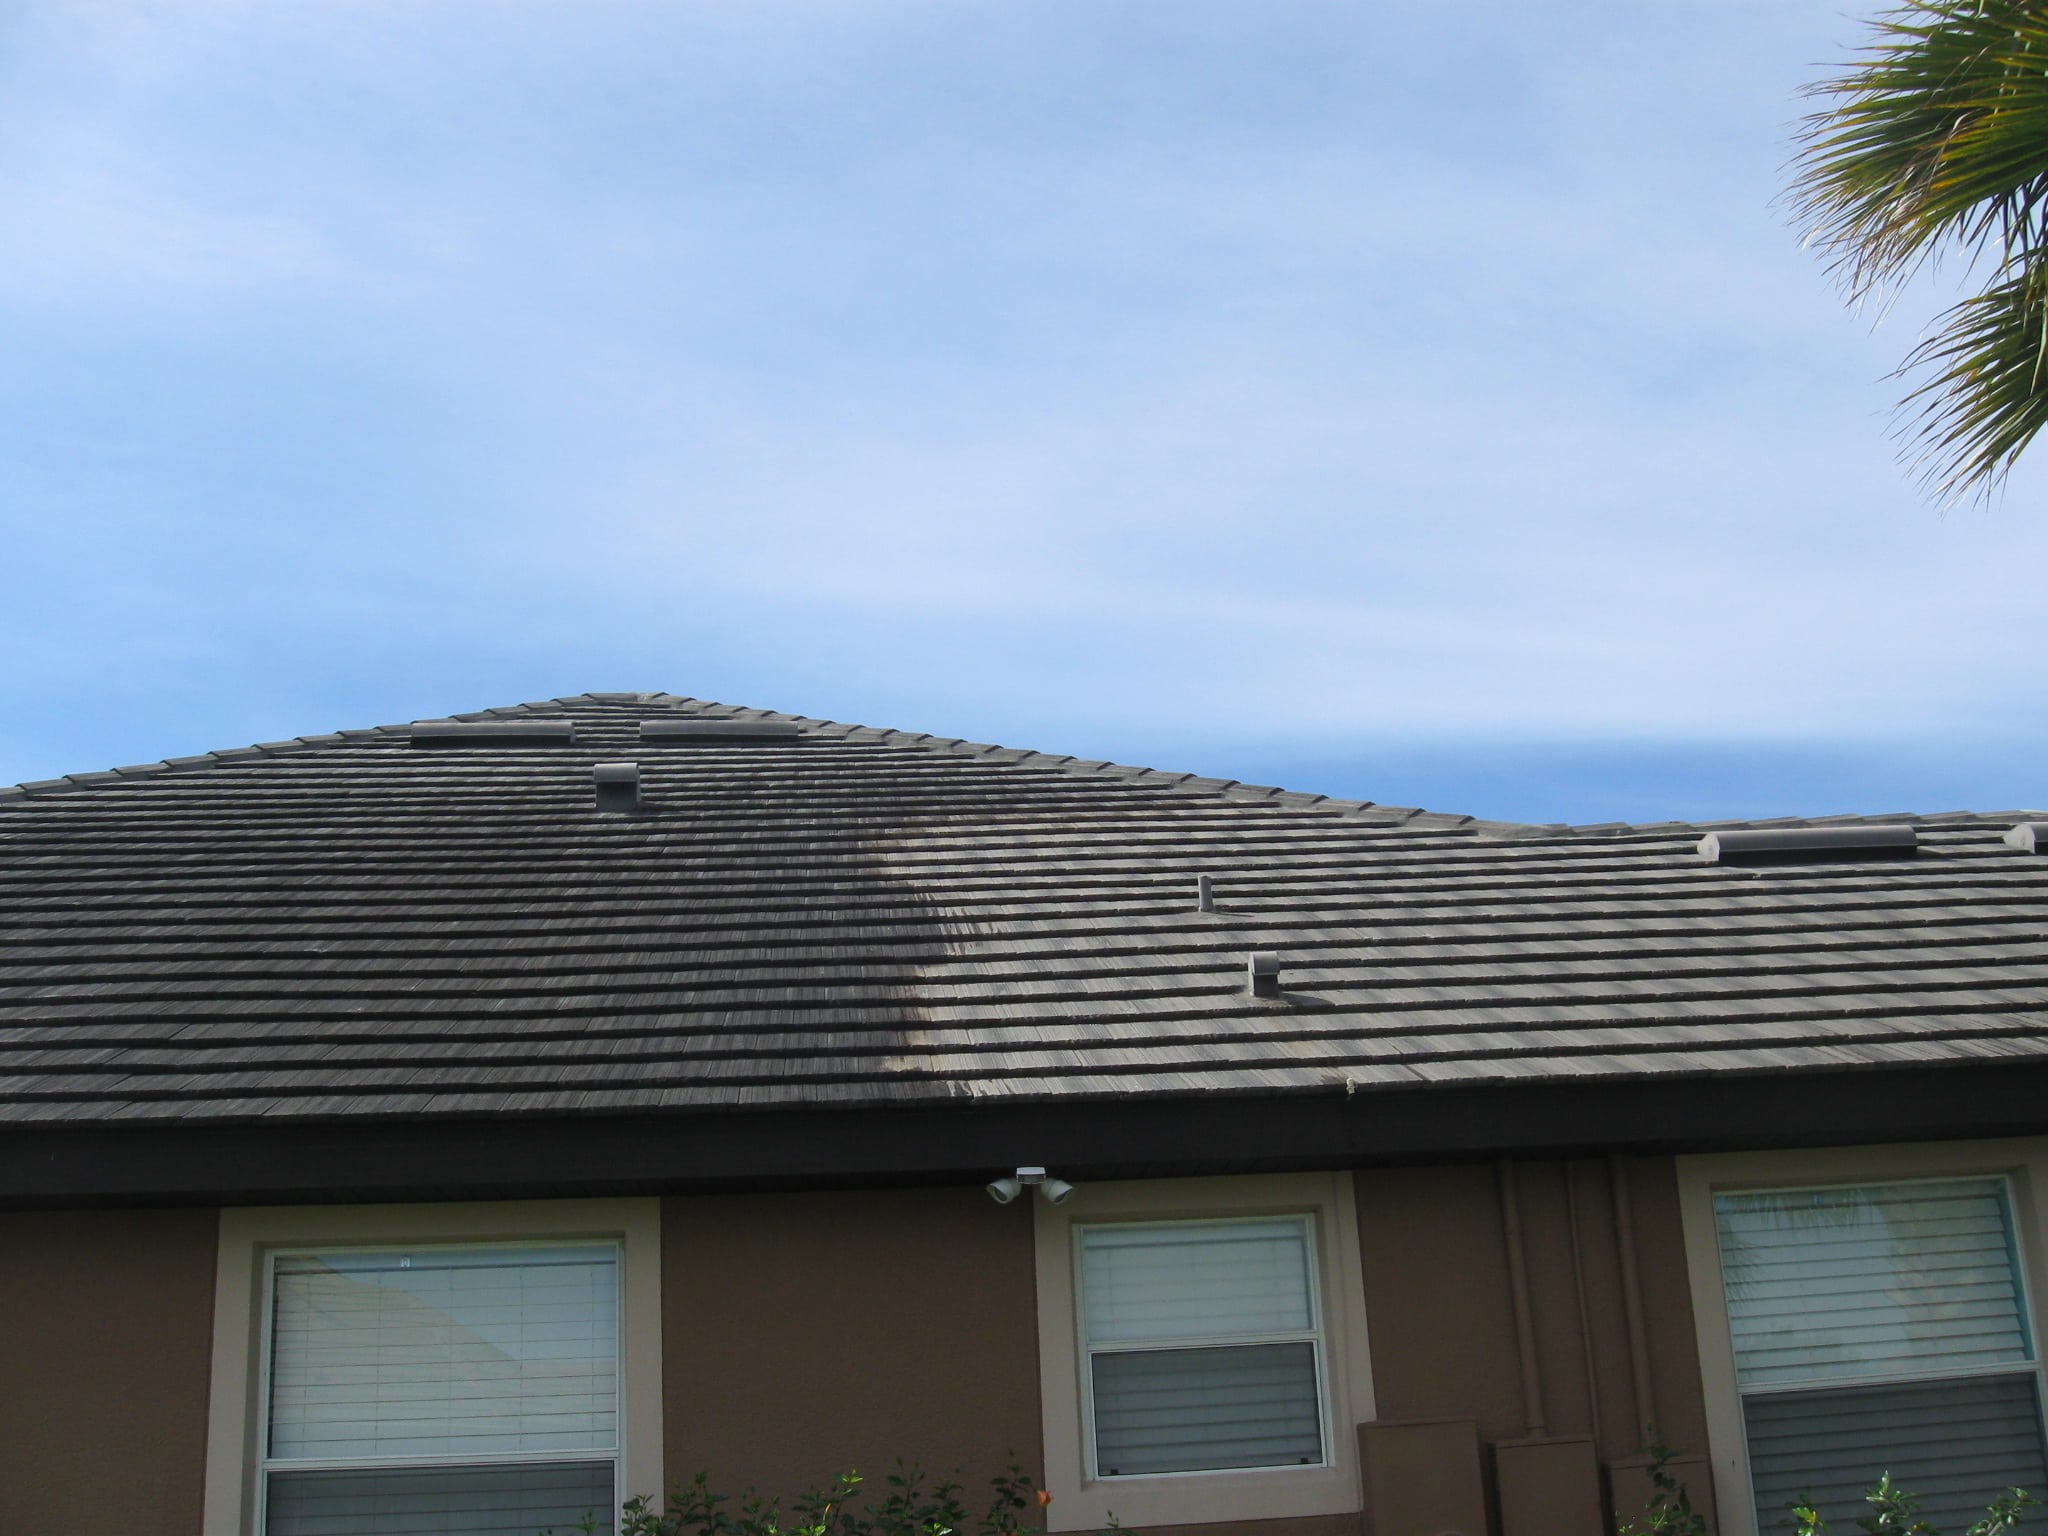 American Knight Roof & Exterior Cleaning LLC - Oakland, FL, US, gutter clean
